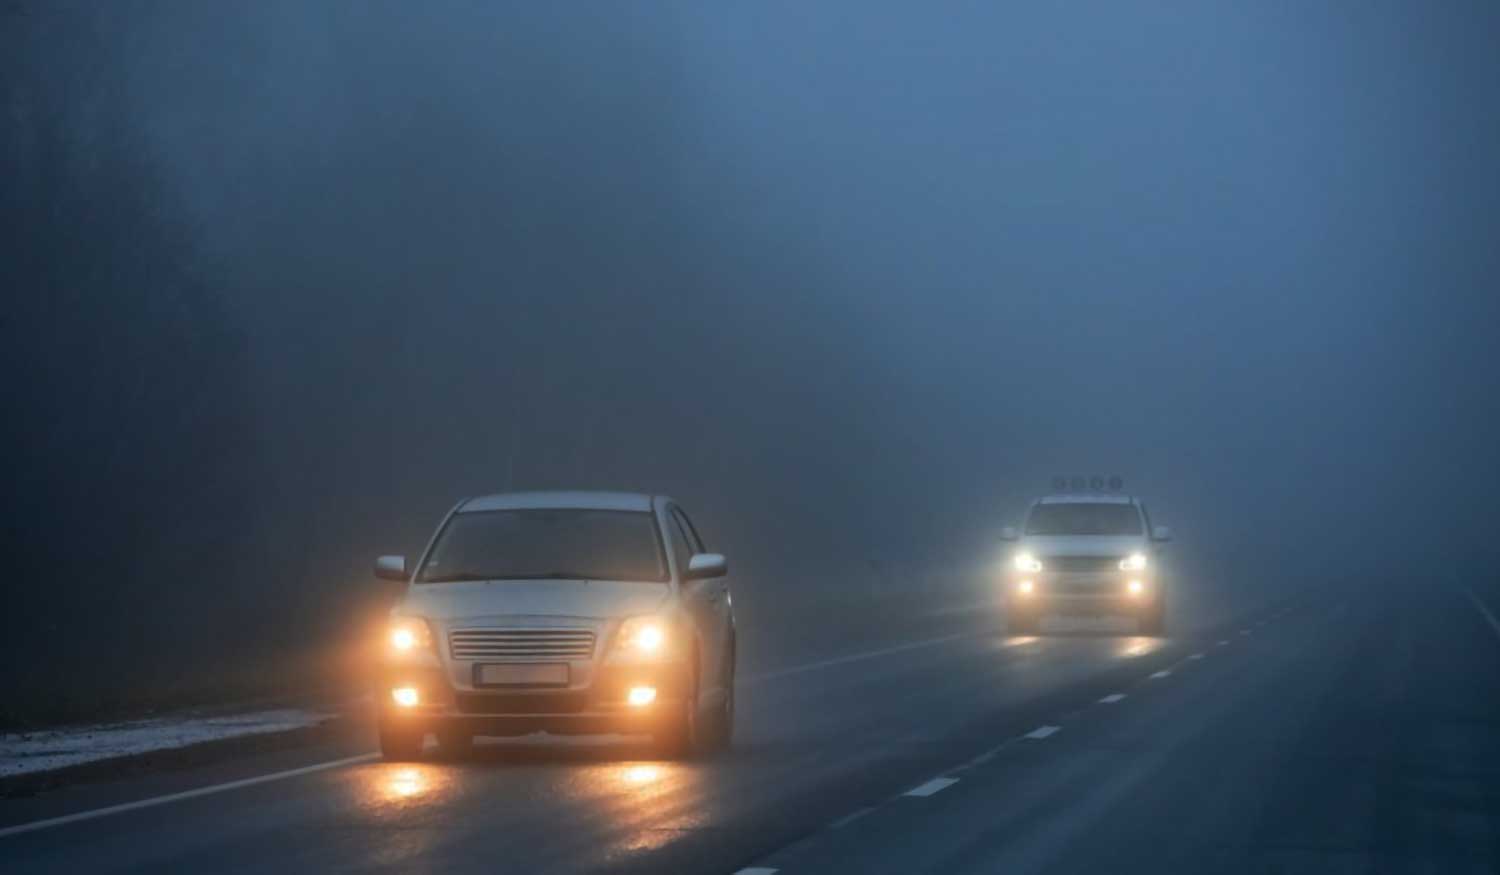 Driving in fog at night can be a very scary feeling. You simply can't see far enough in front of you to properly react. Are we seeking God's protection in the "fog" of the unknowns in our lives?